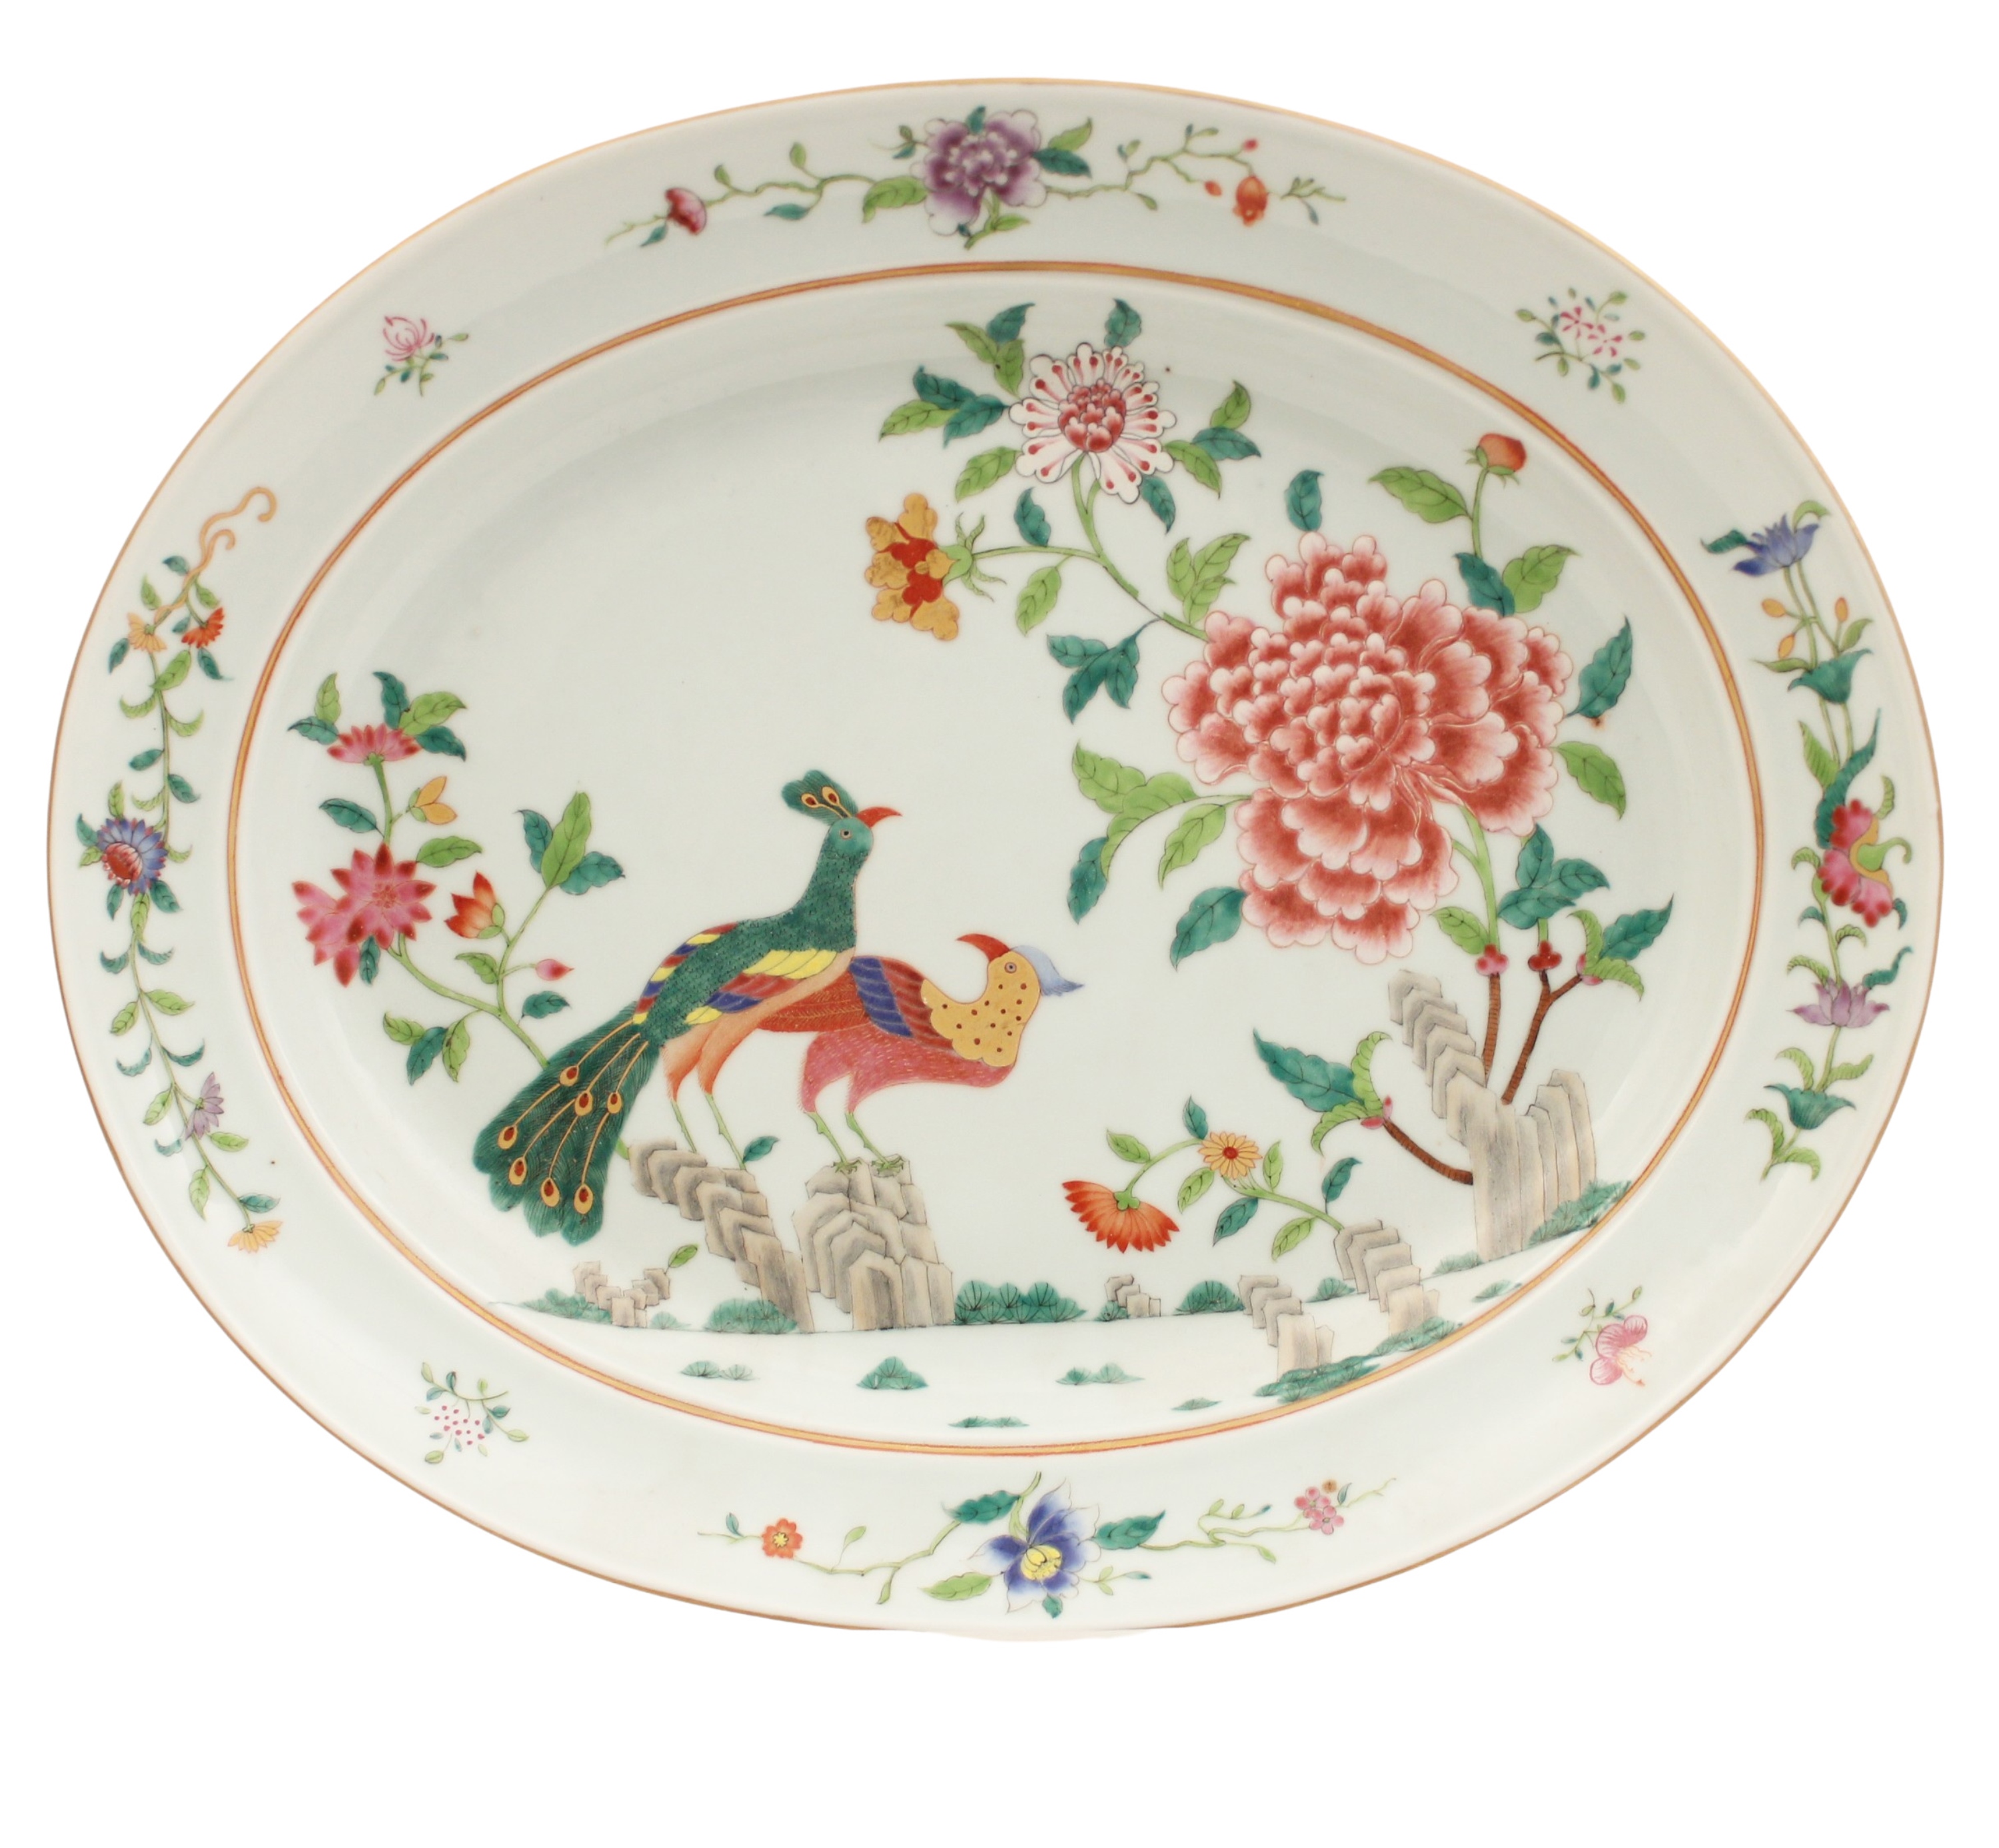 ORIENTAL PORCELAIN OVAL CHARGER